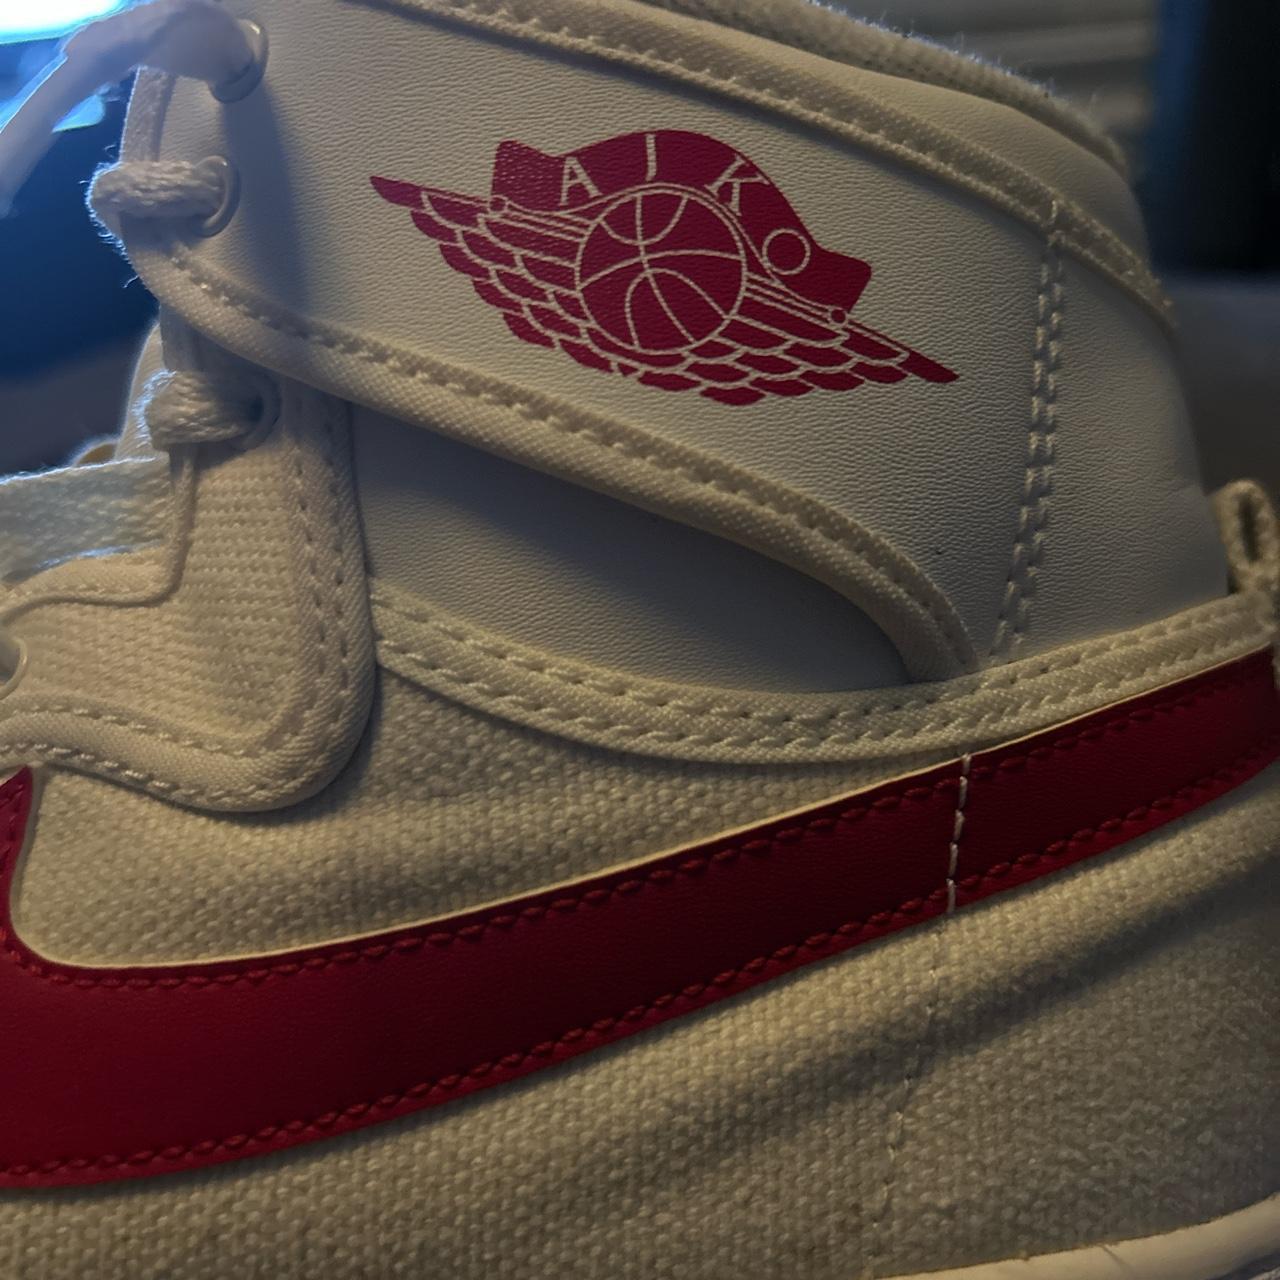 Jordan Men's White and Red Trainers (4)